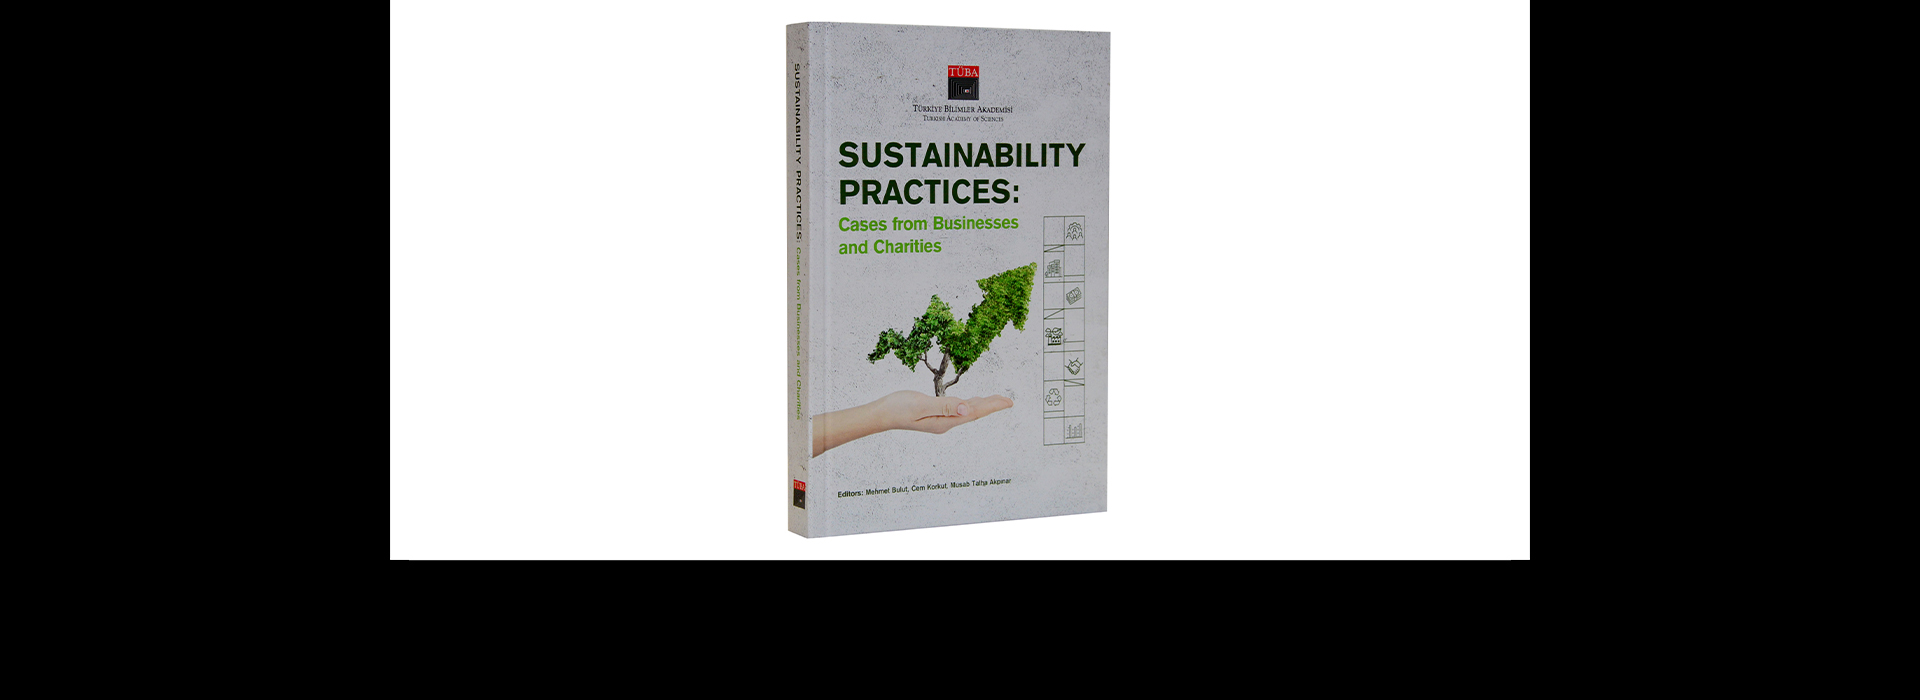 A New Breakthrough in Sustainability by TÜBA “Sustainability Practices Cases from Businesses and Charities”